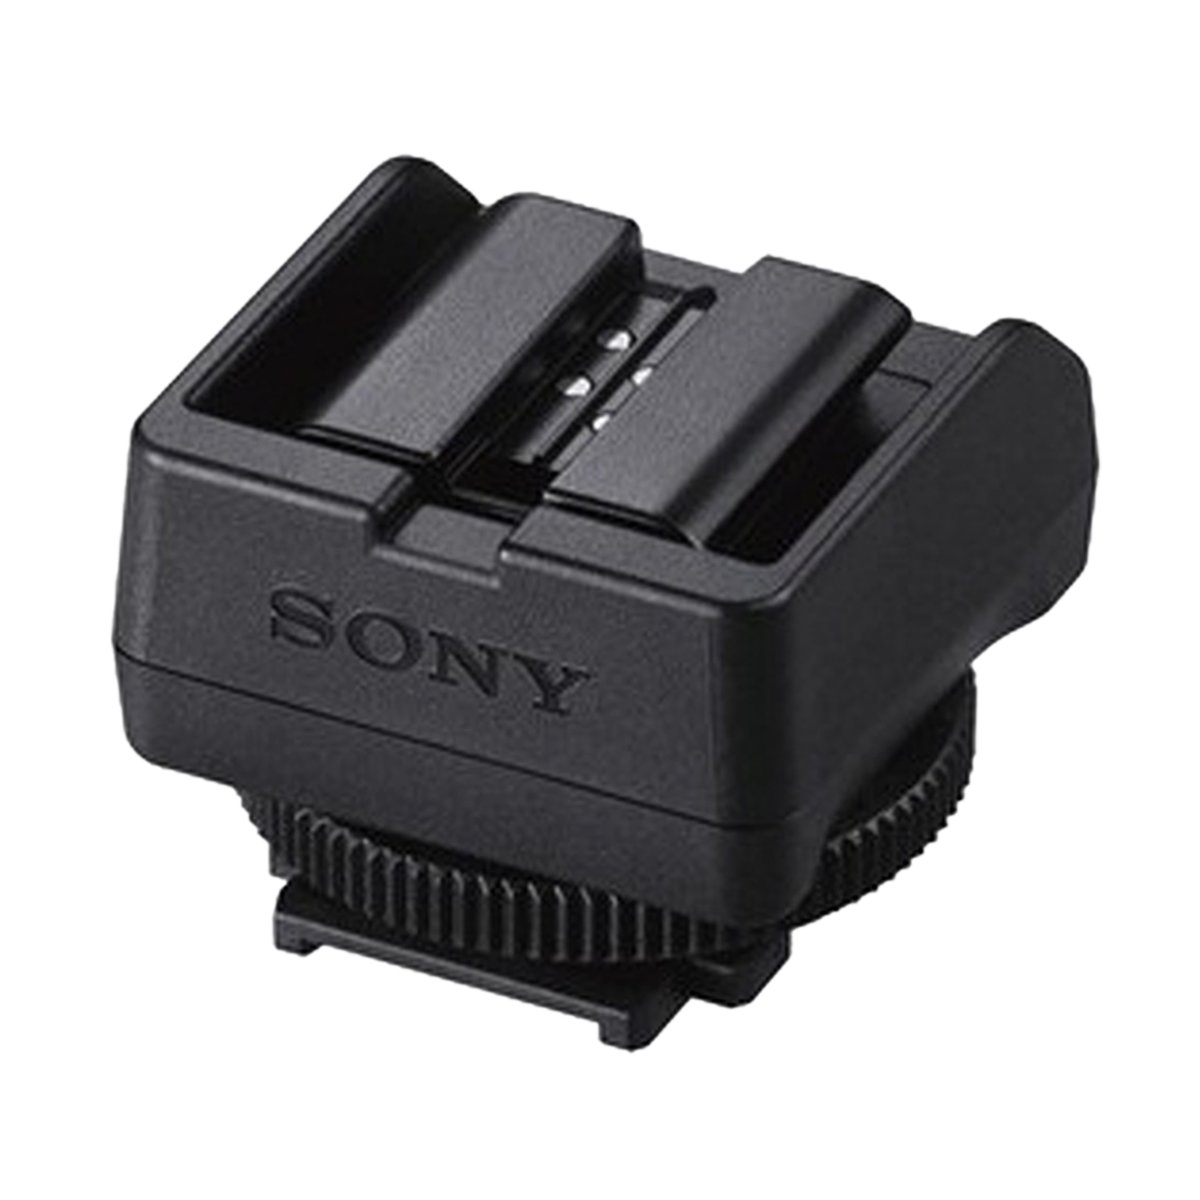 Sony ADPMAC Multi-Interface Shoe Adapter for Camcorder Black 